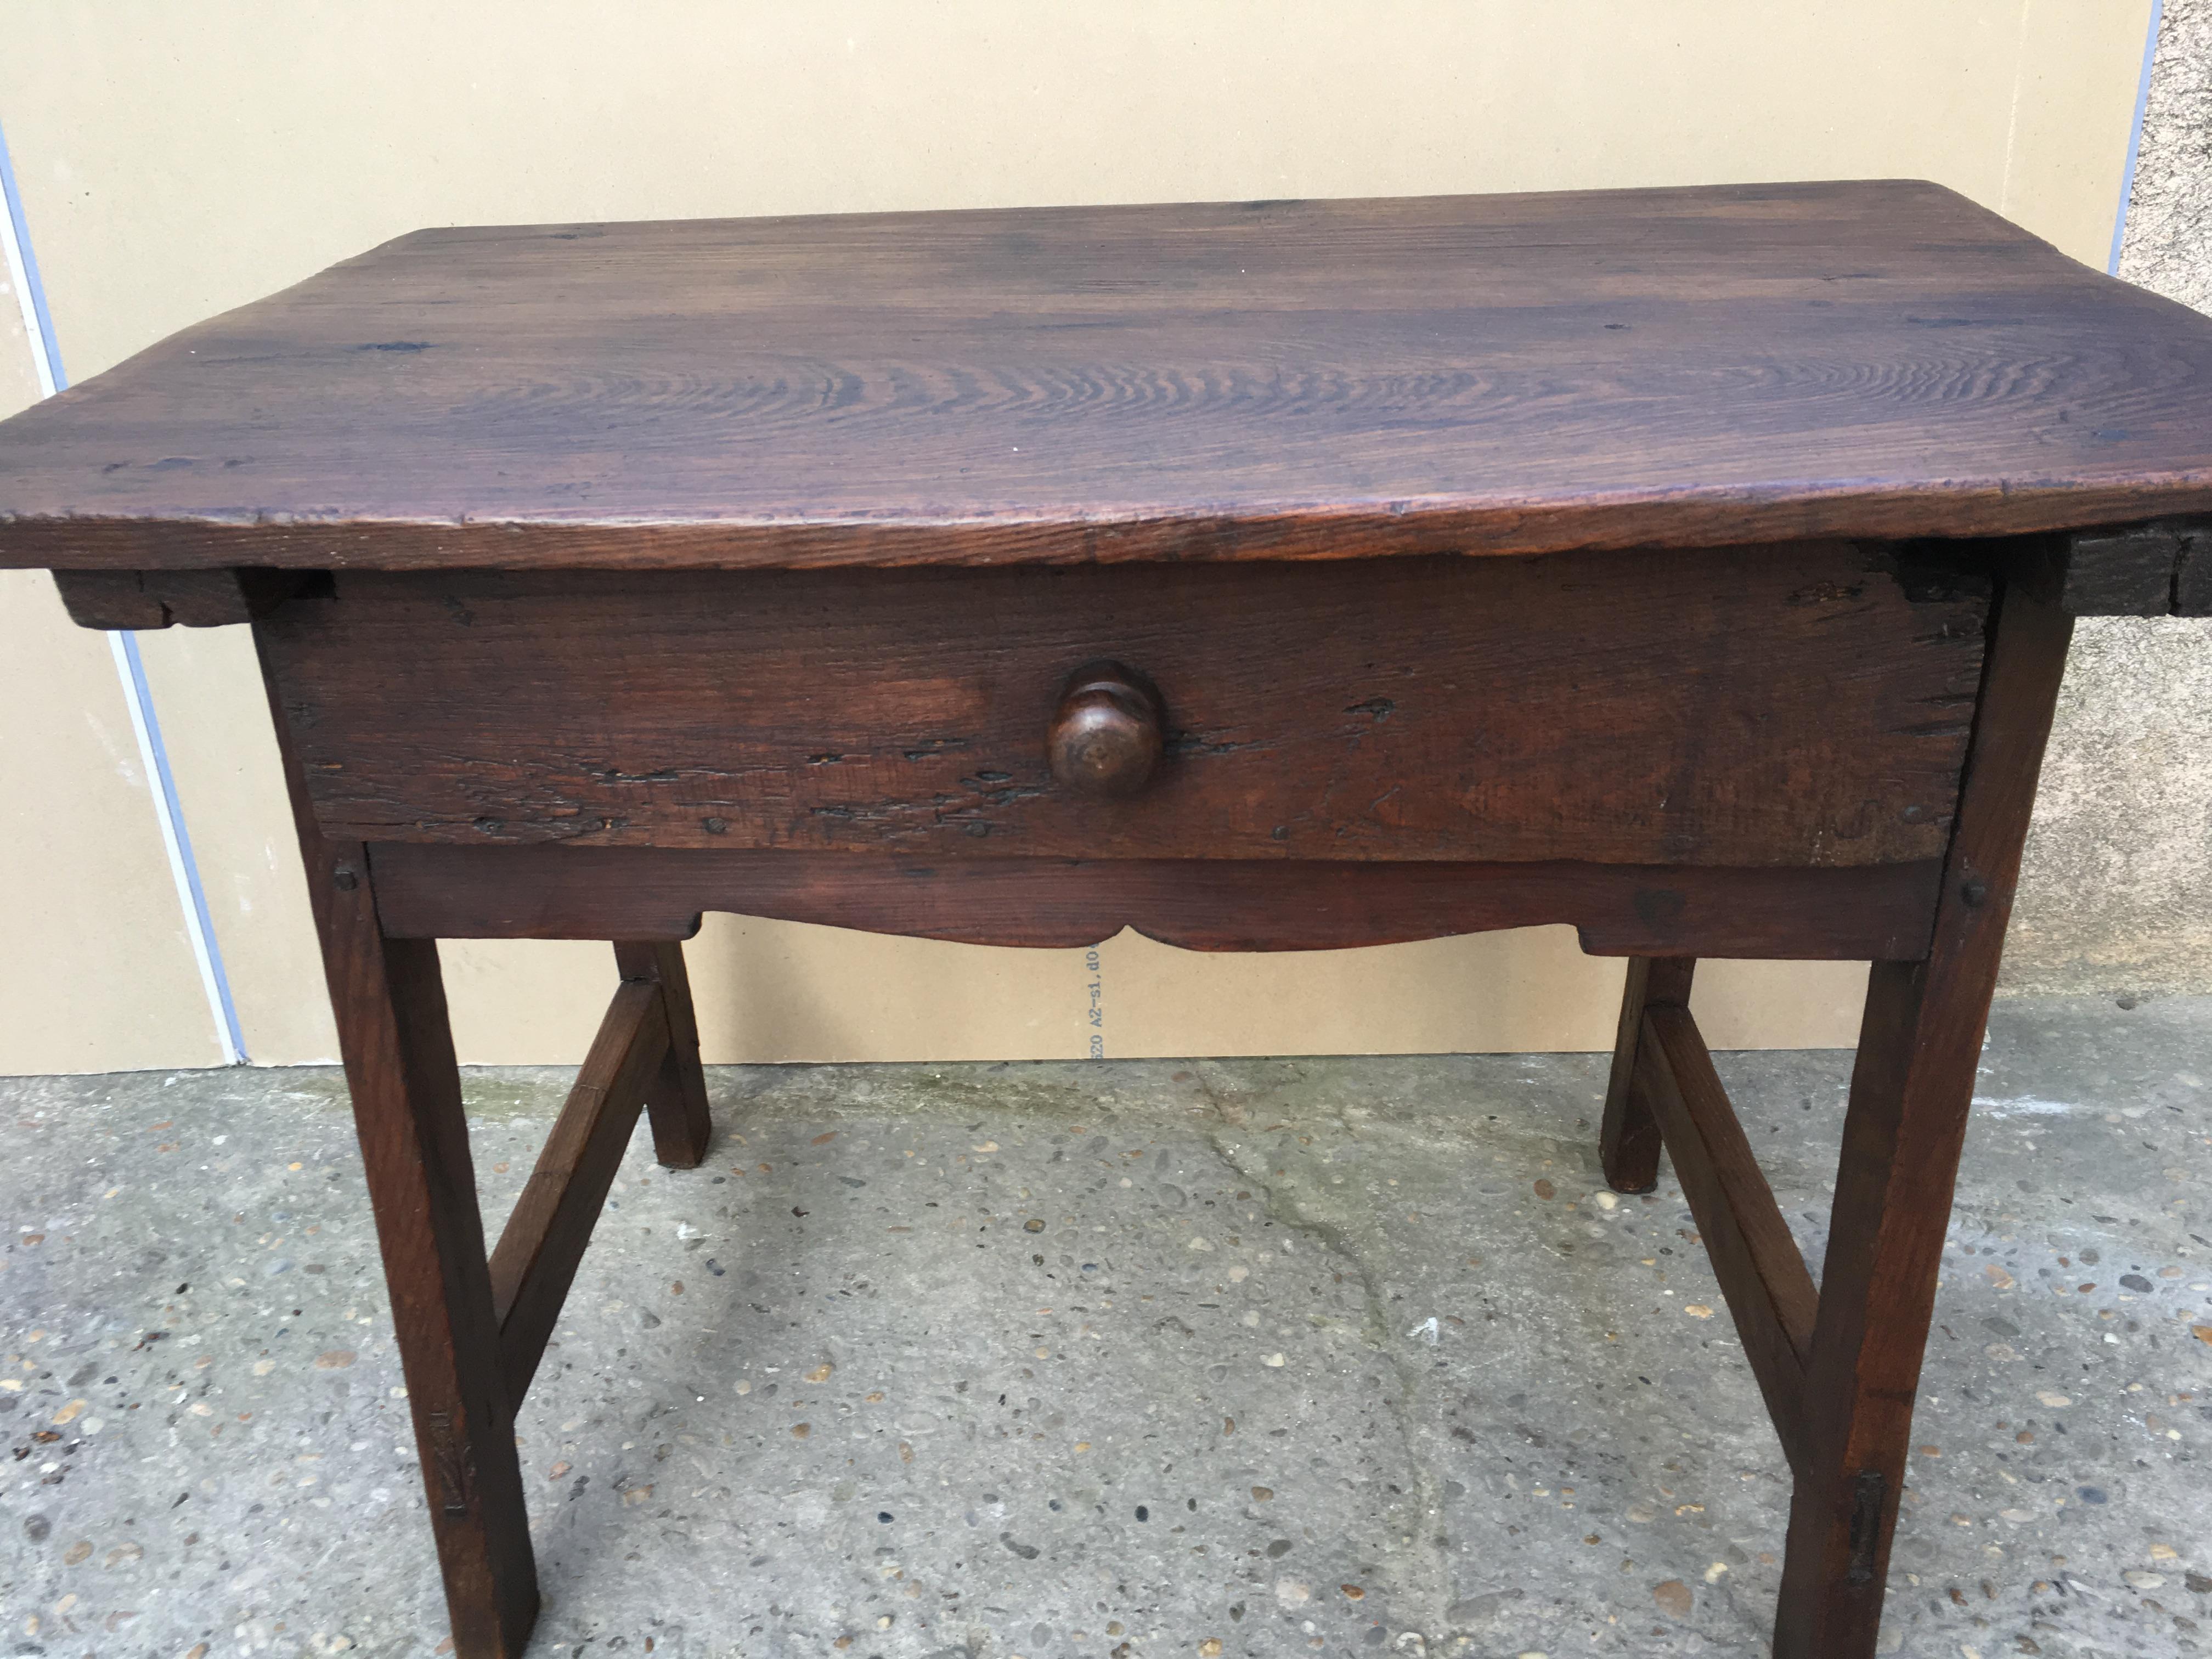 18th century rustic Spanish wooden table with beautiful patina. The table has a large single drawer and is supported on four square legs joined by cross stretchers. 

This table will enhance any rustic themed setting. 